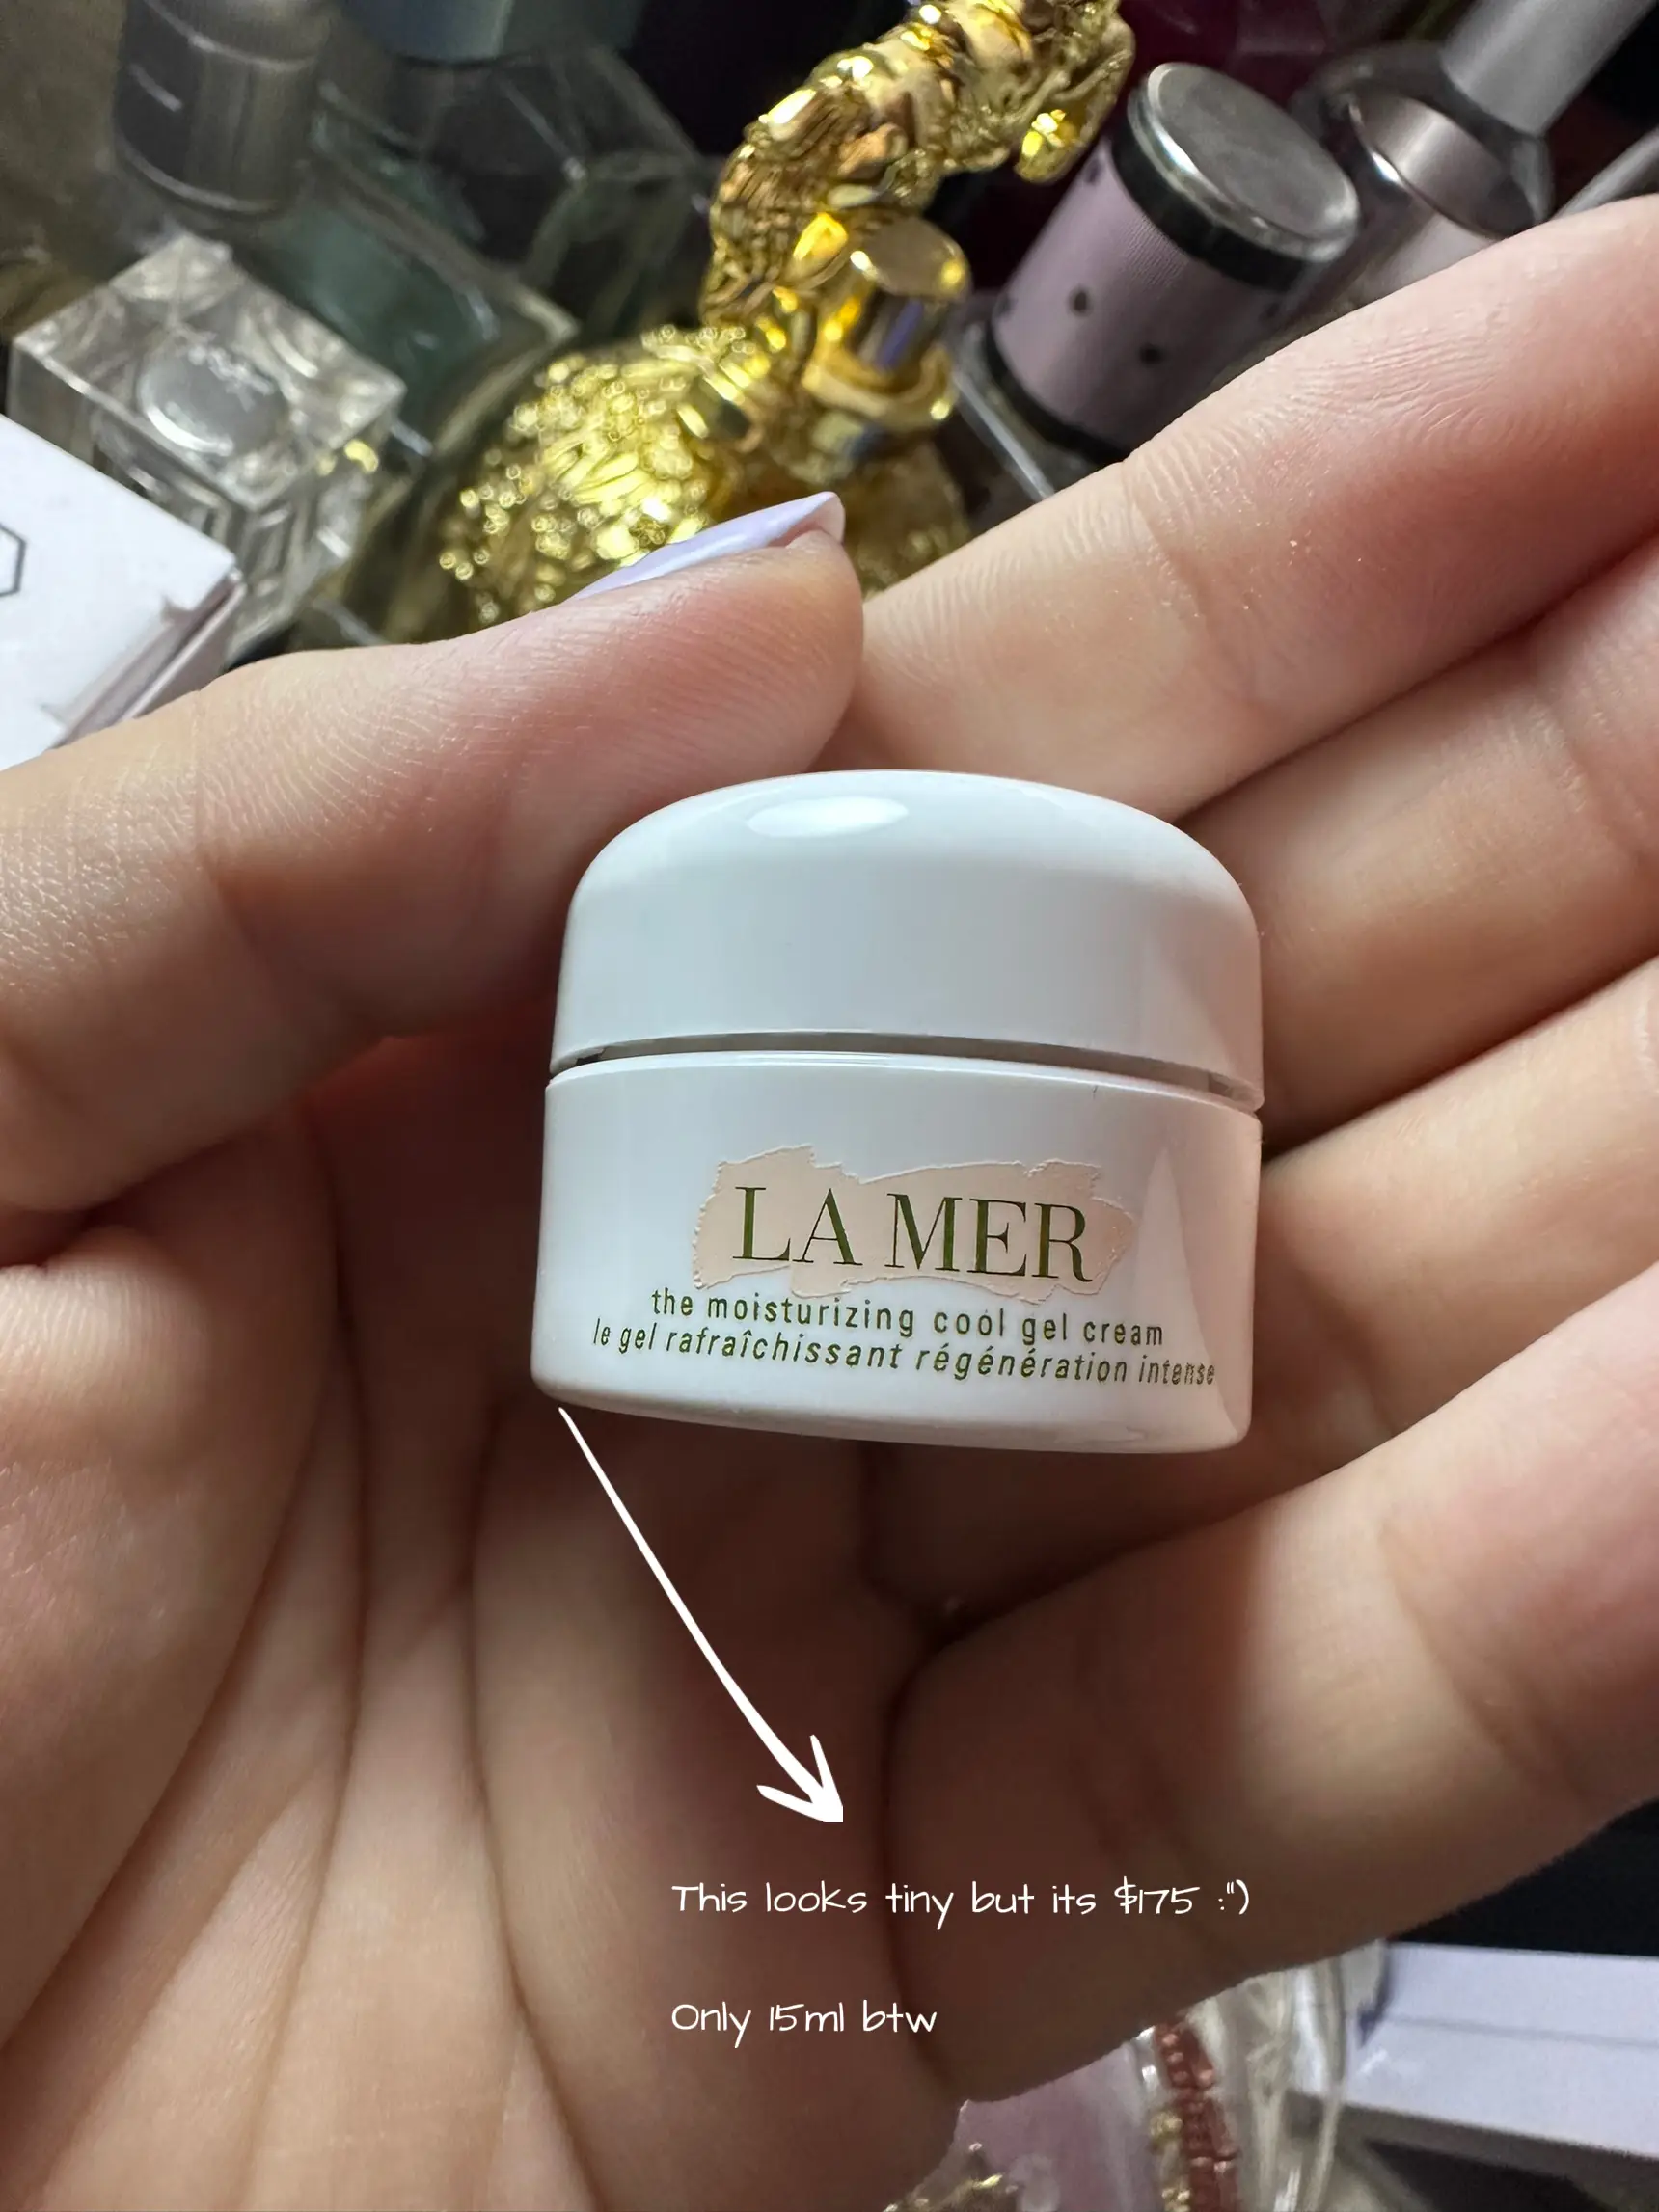 LA MER DUPE for a fraction of the price 😩, Gallery posted by caryn🥰